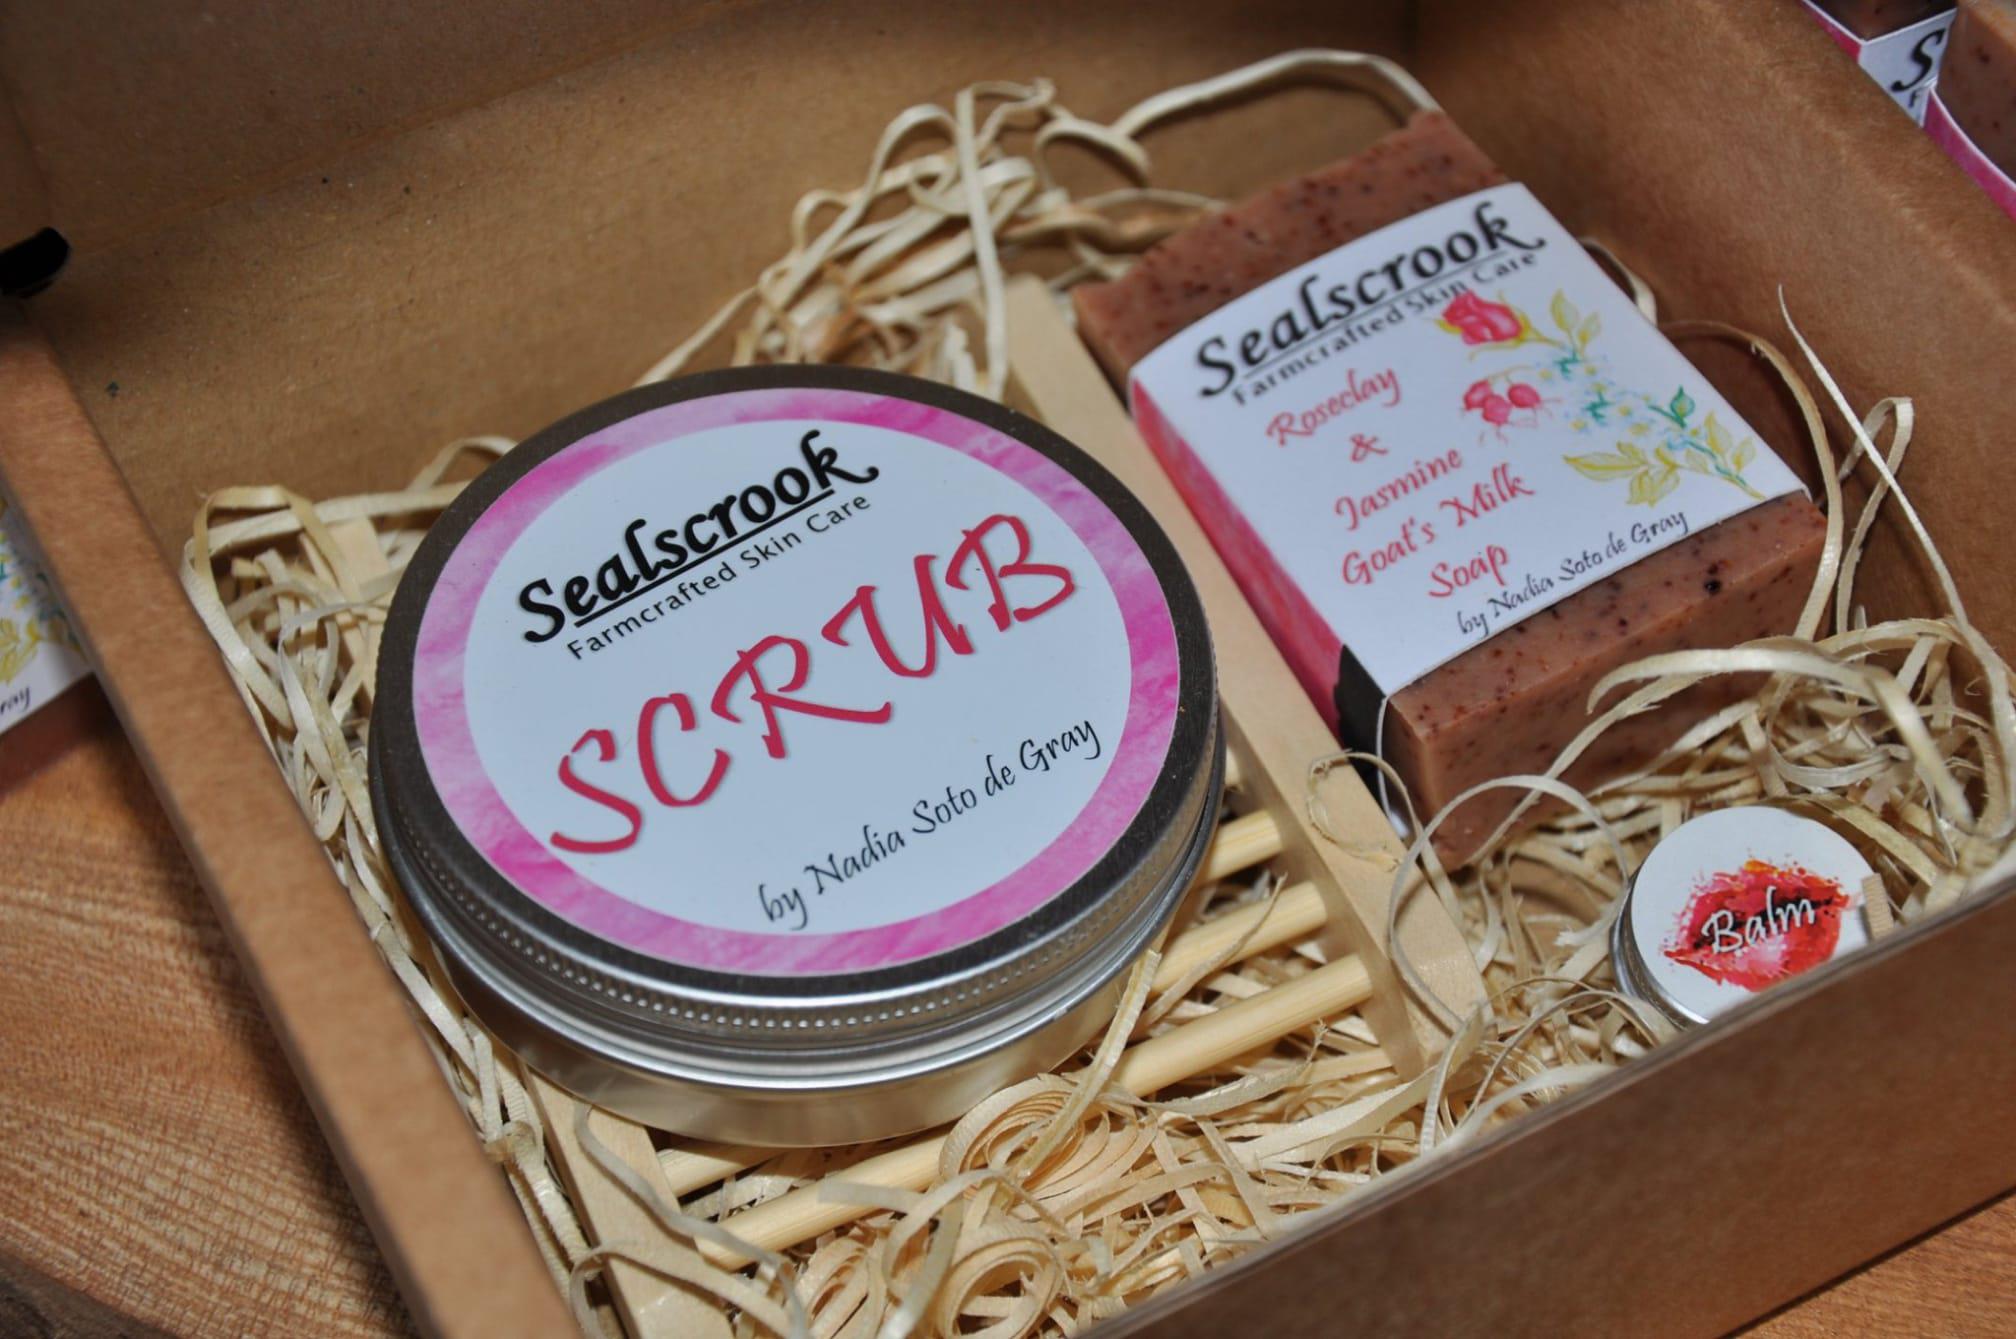 Images Sealscrook Farmcrafted Skin Care